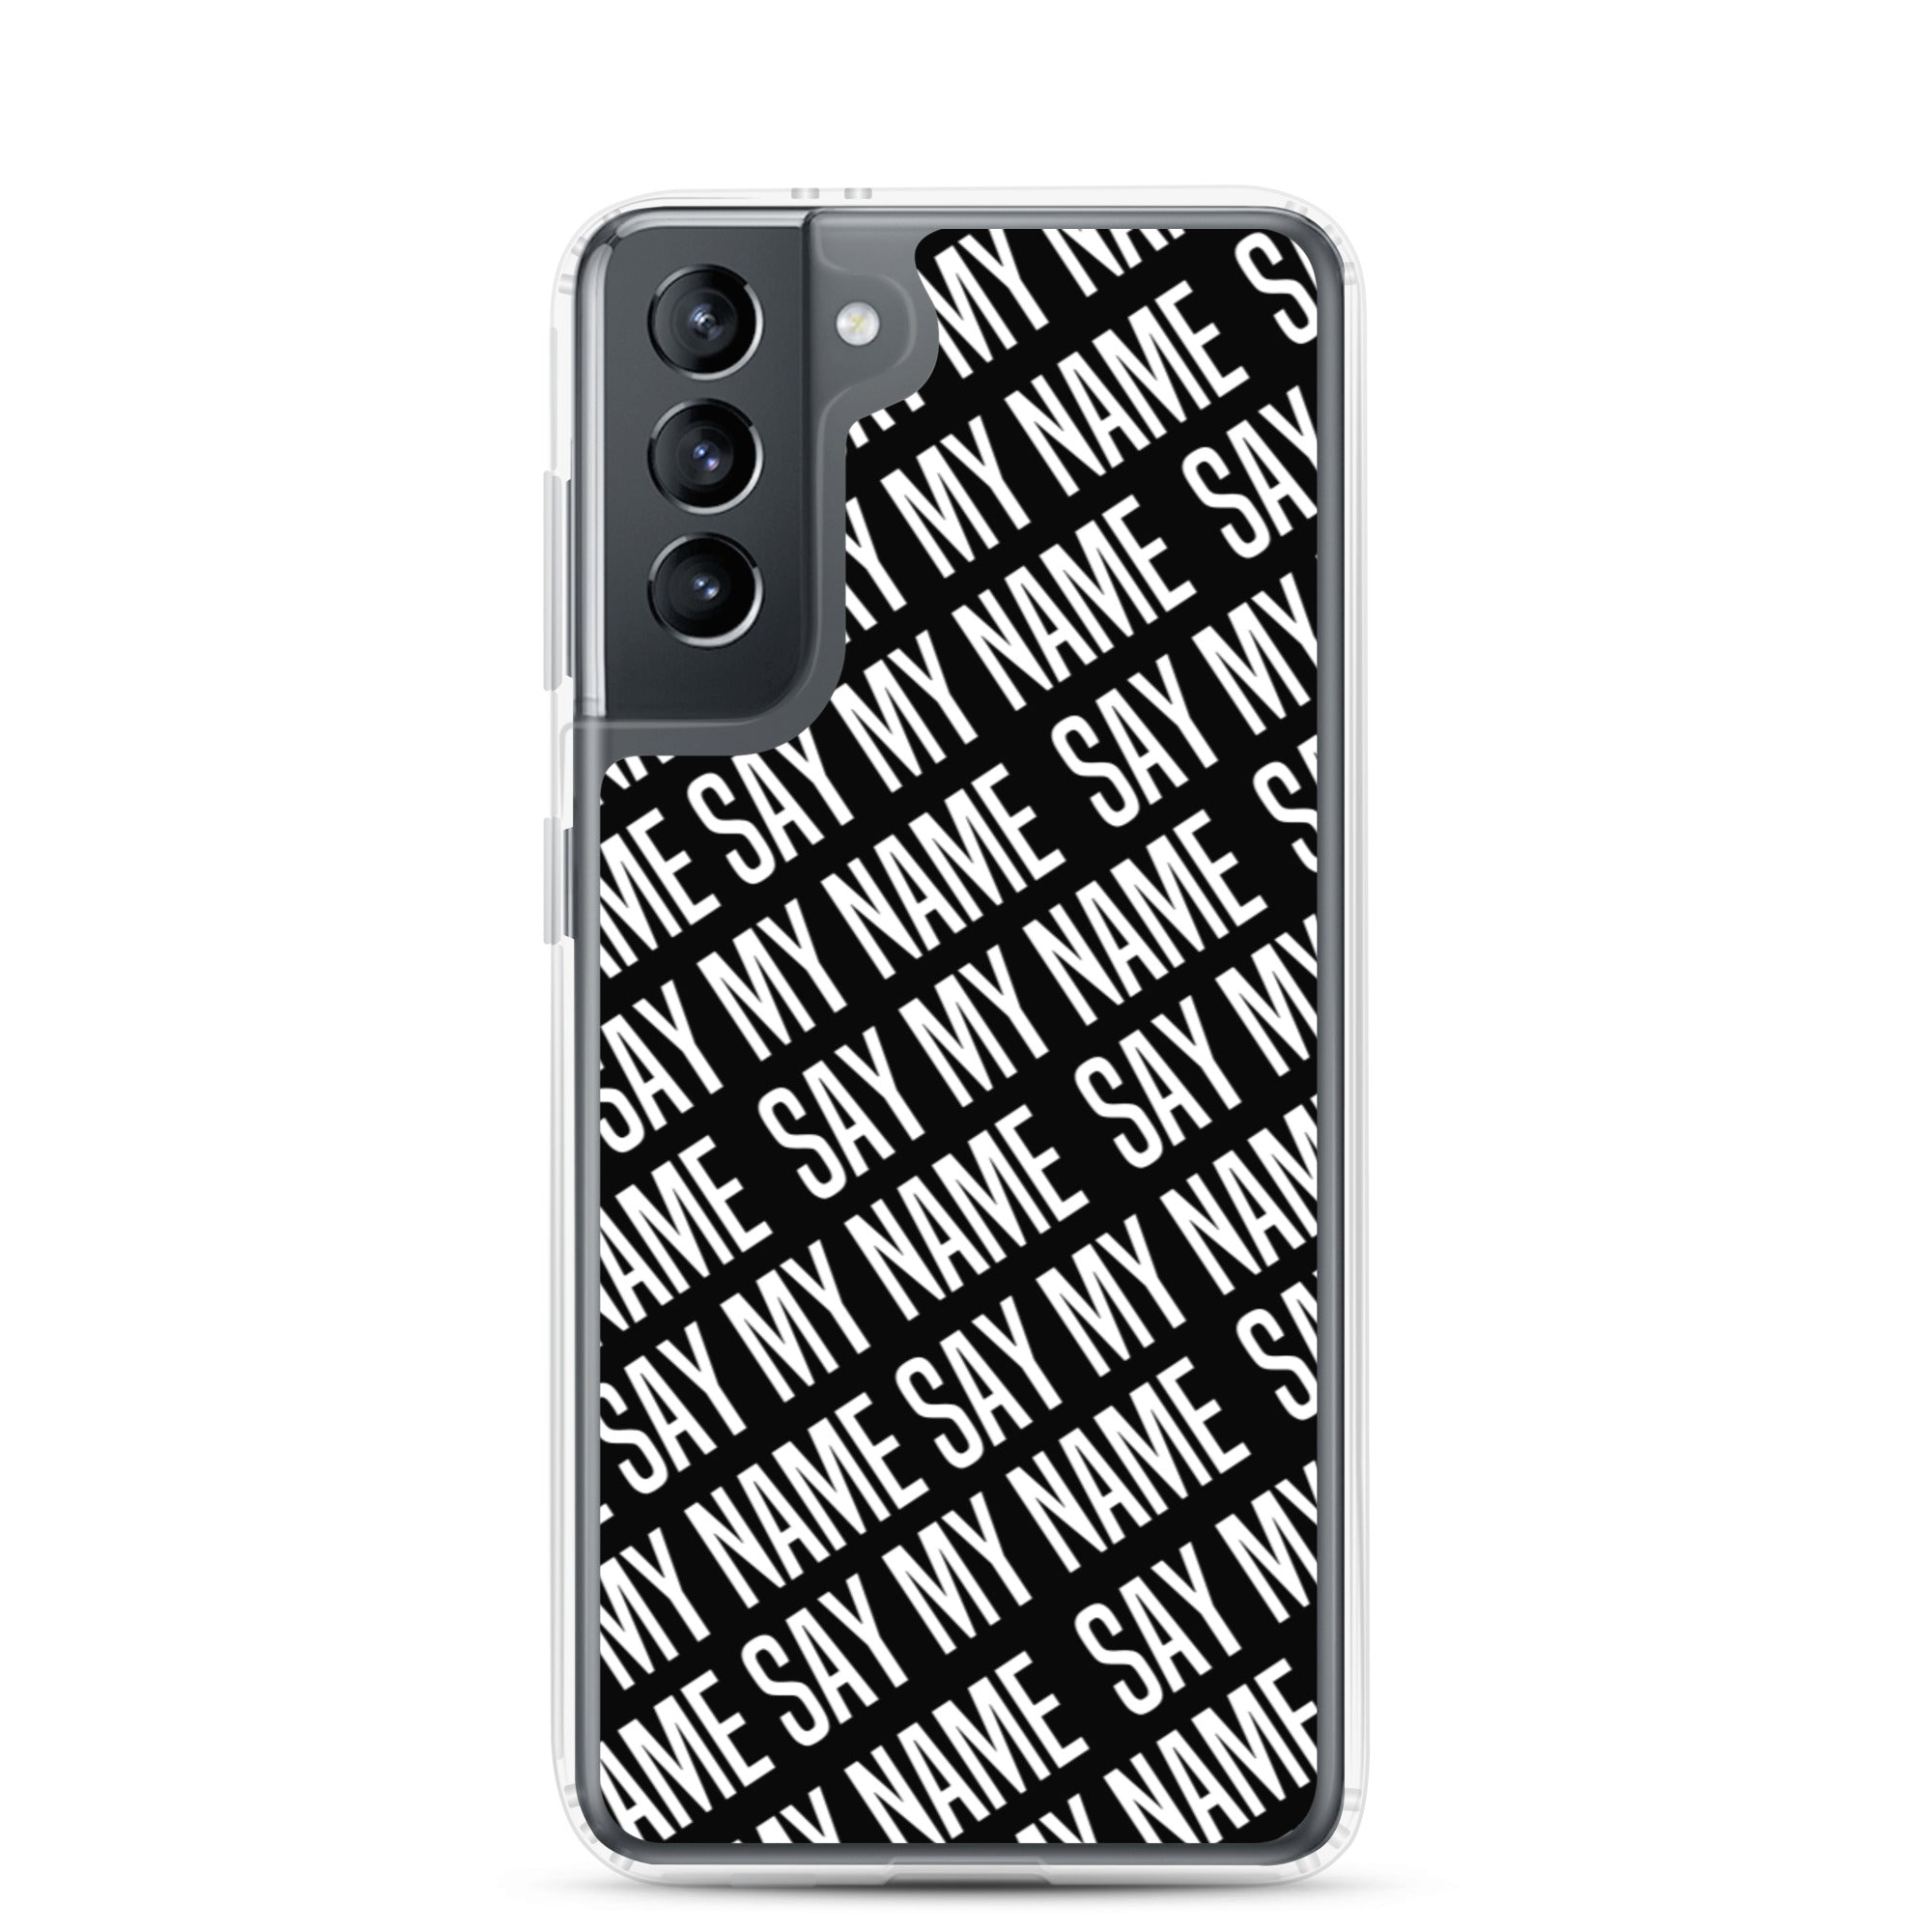 Coque "SAY MY NAME" Samsung